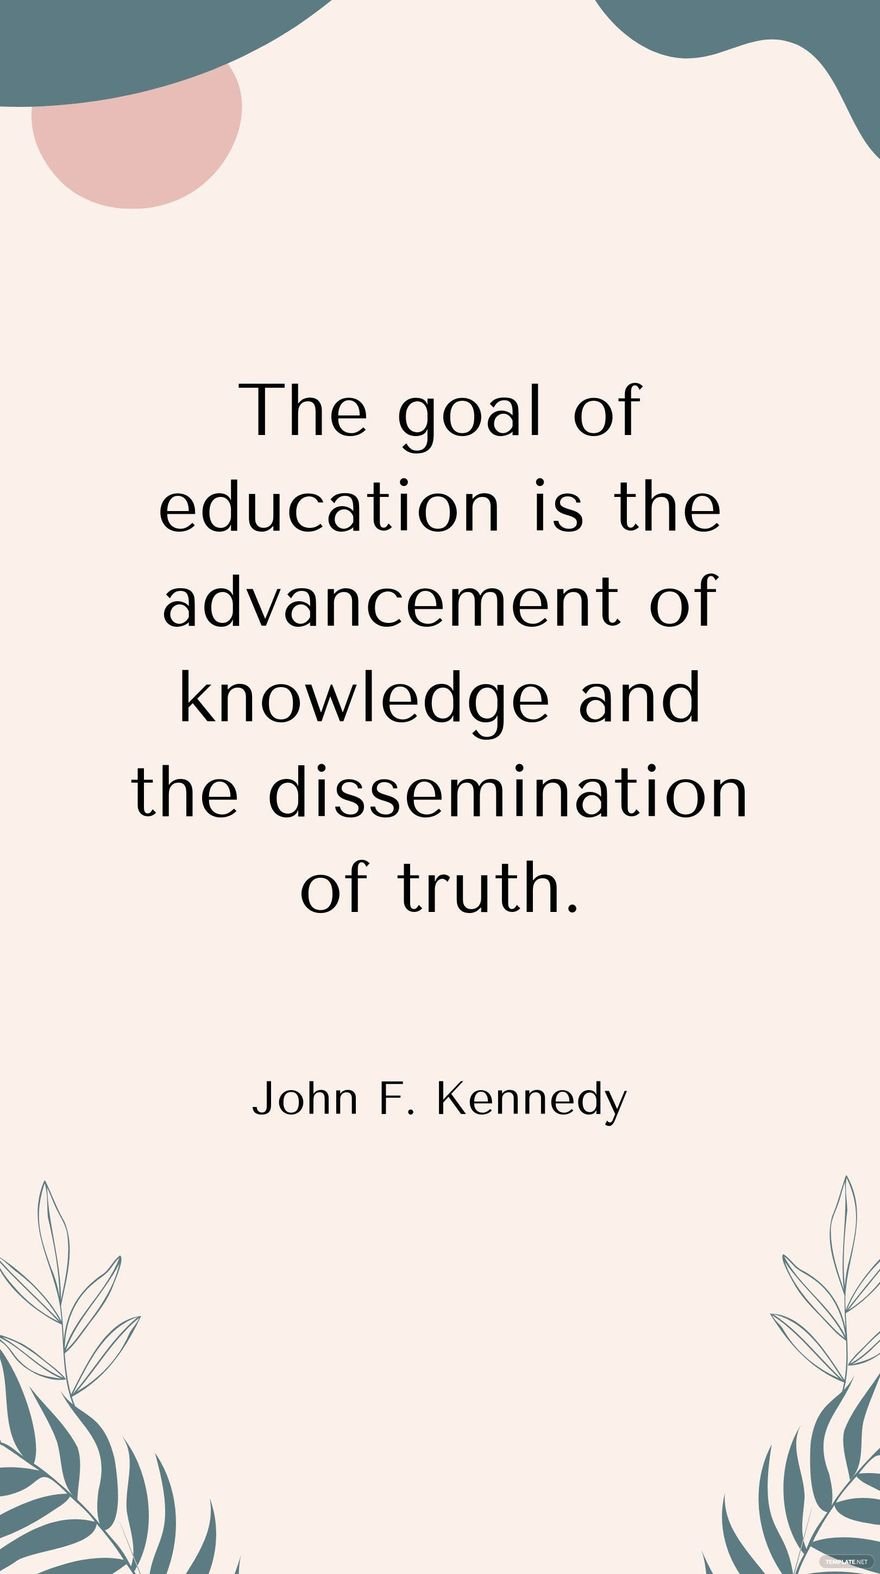 Free John F. Kennedy - The goal of education is the advancement of knowledge and the dissemination of truth. in JPG